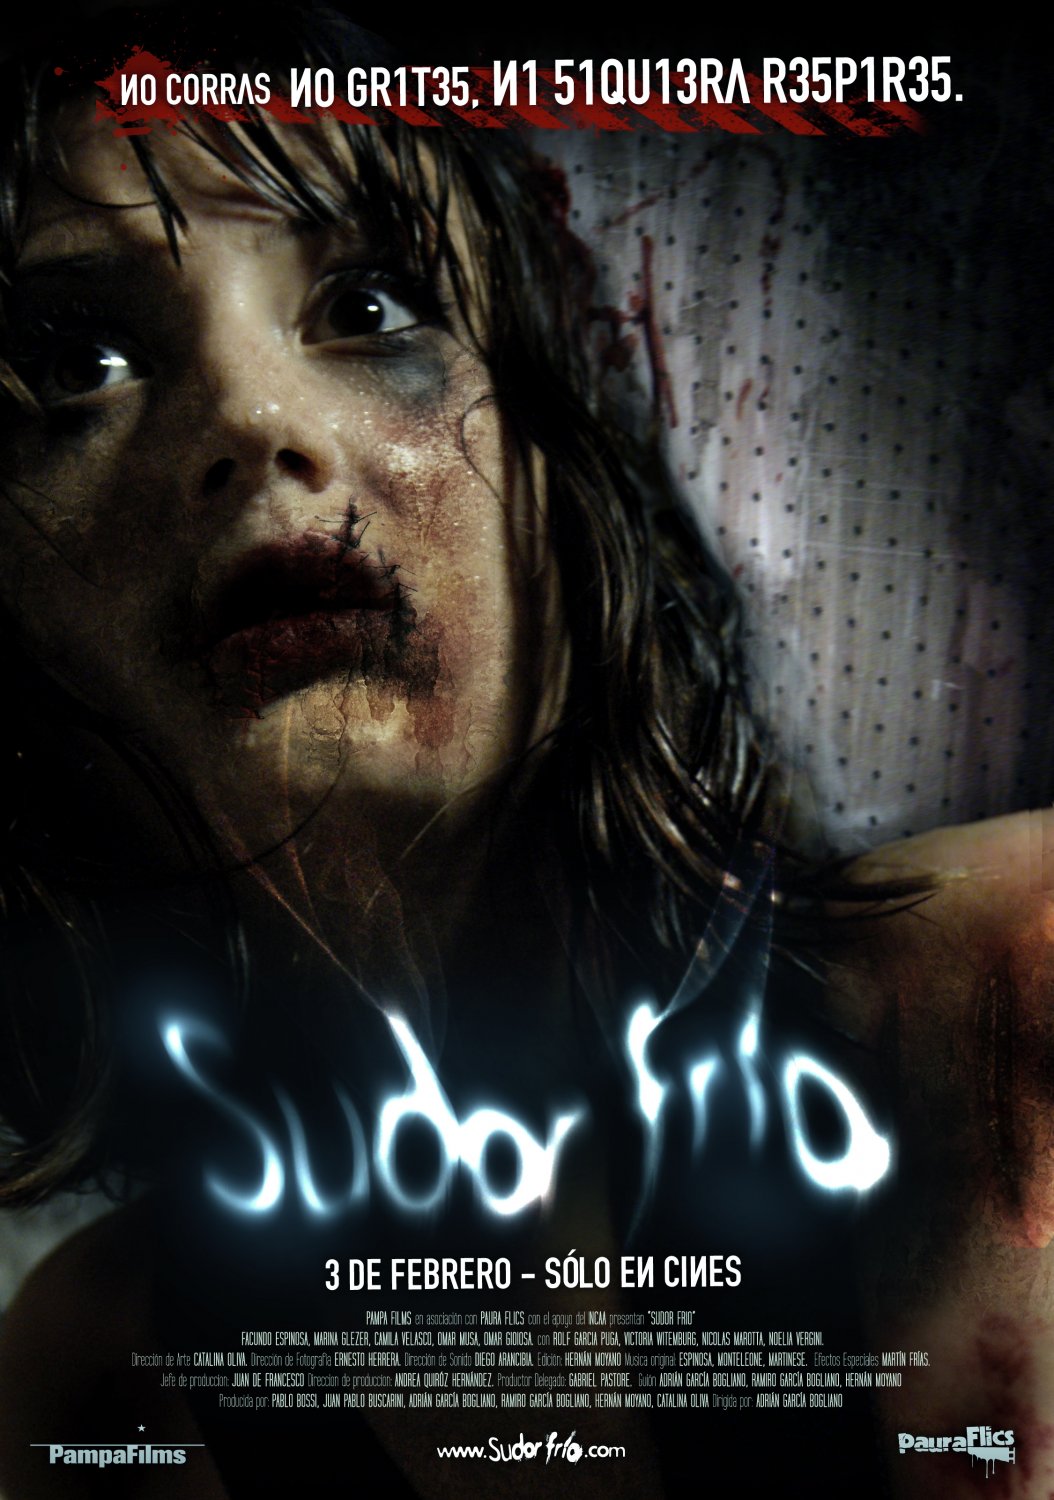 Extra Large Movie Poster Image for Sudor frío 